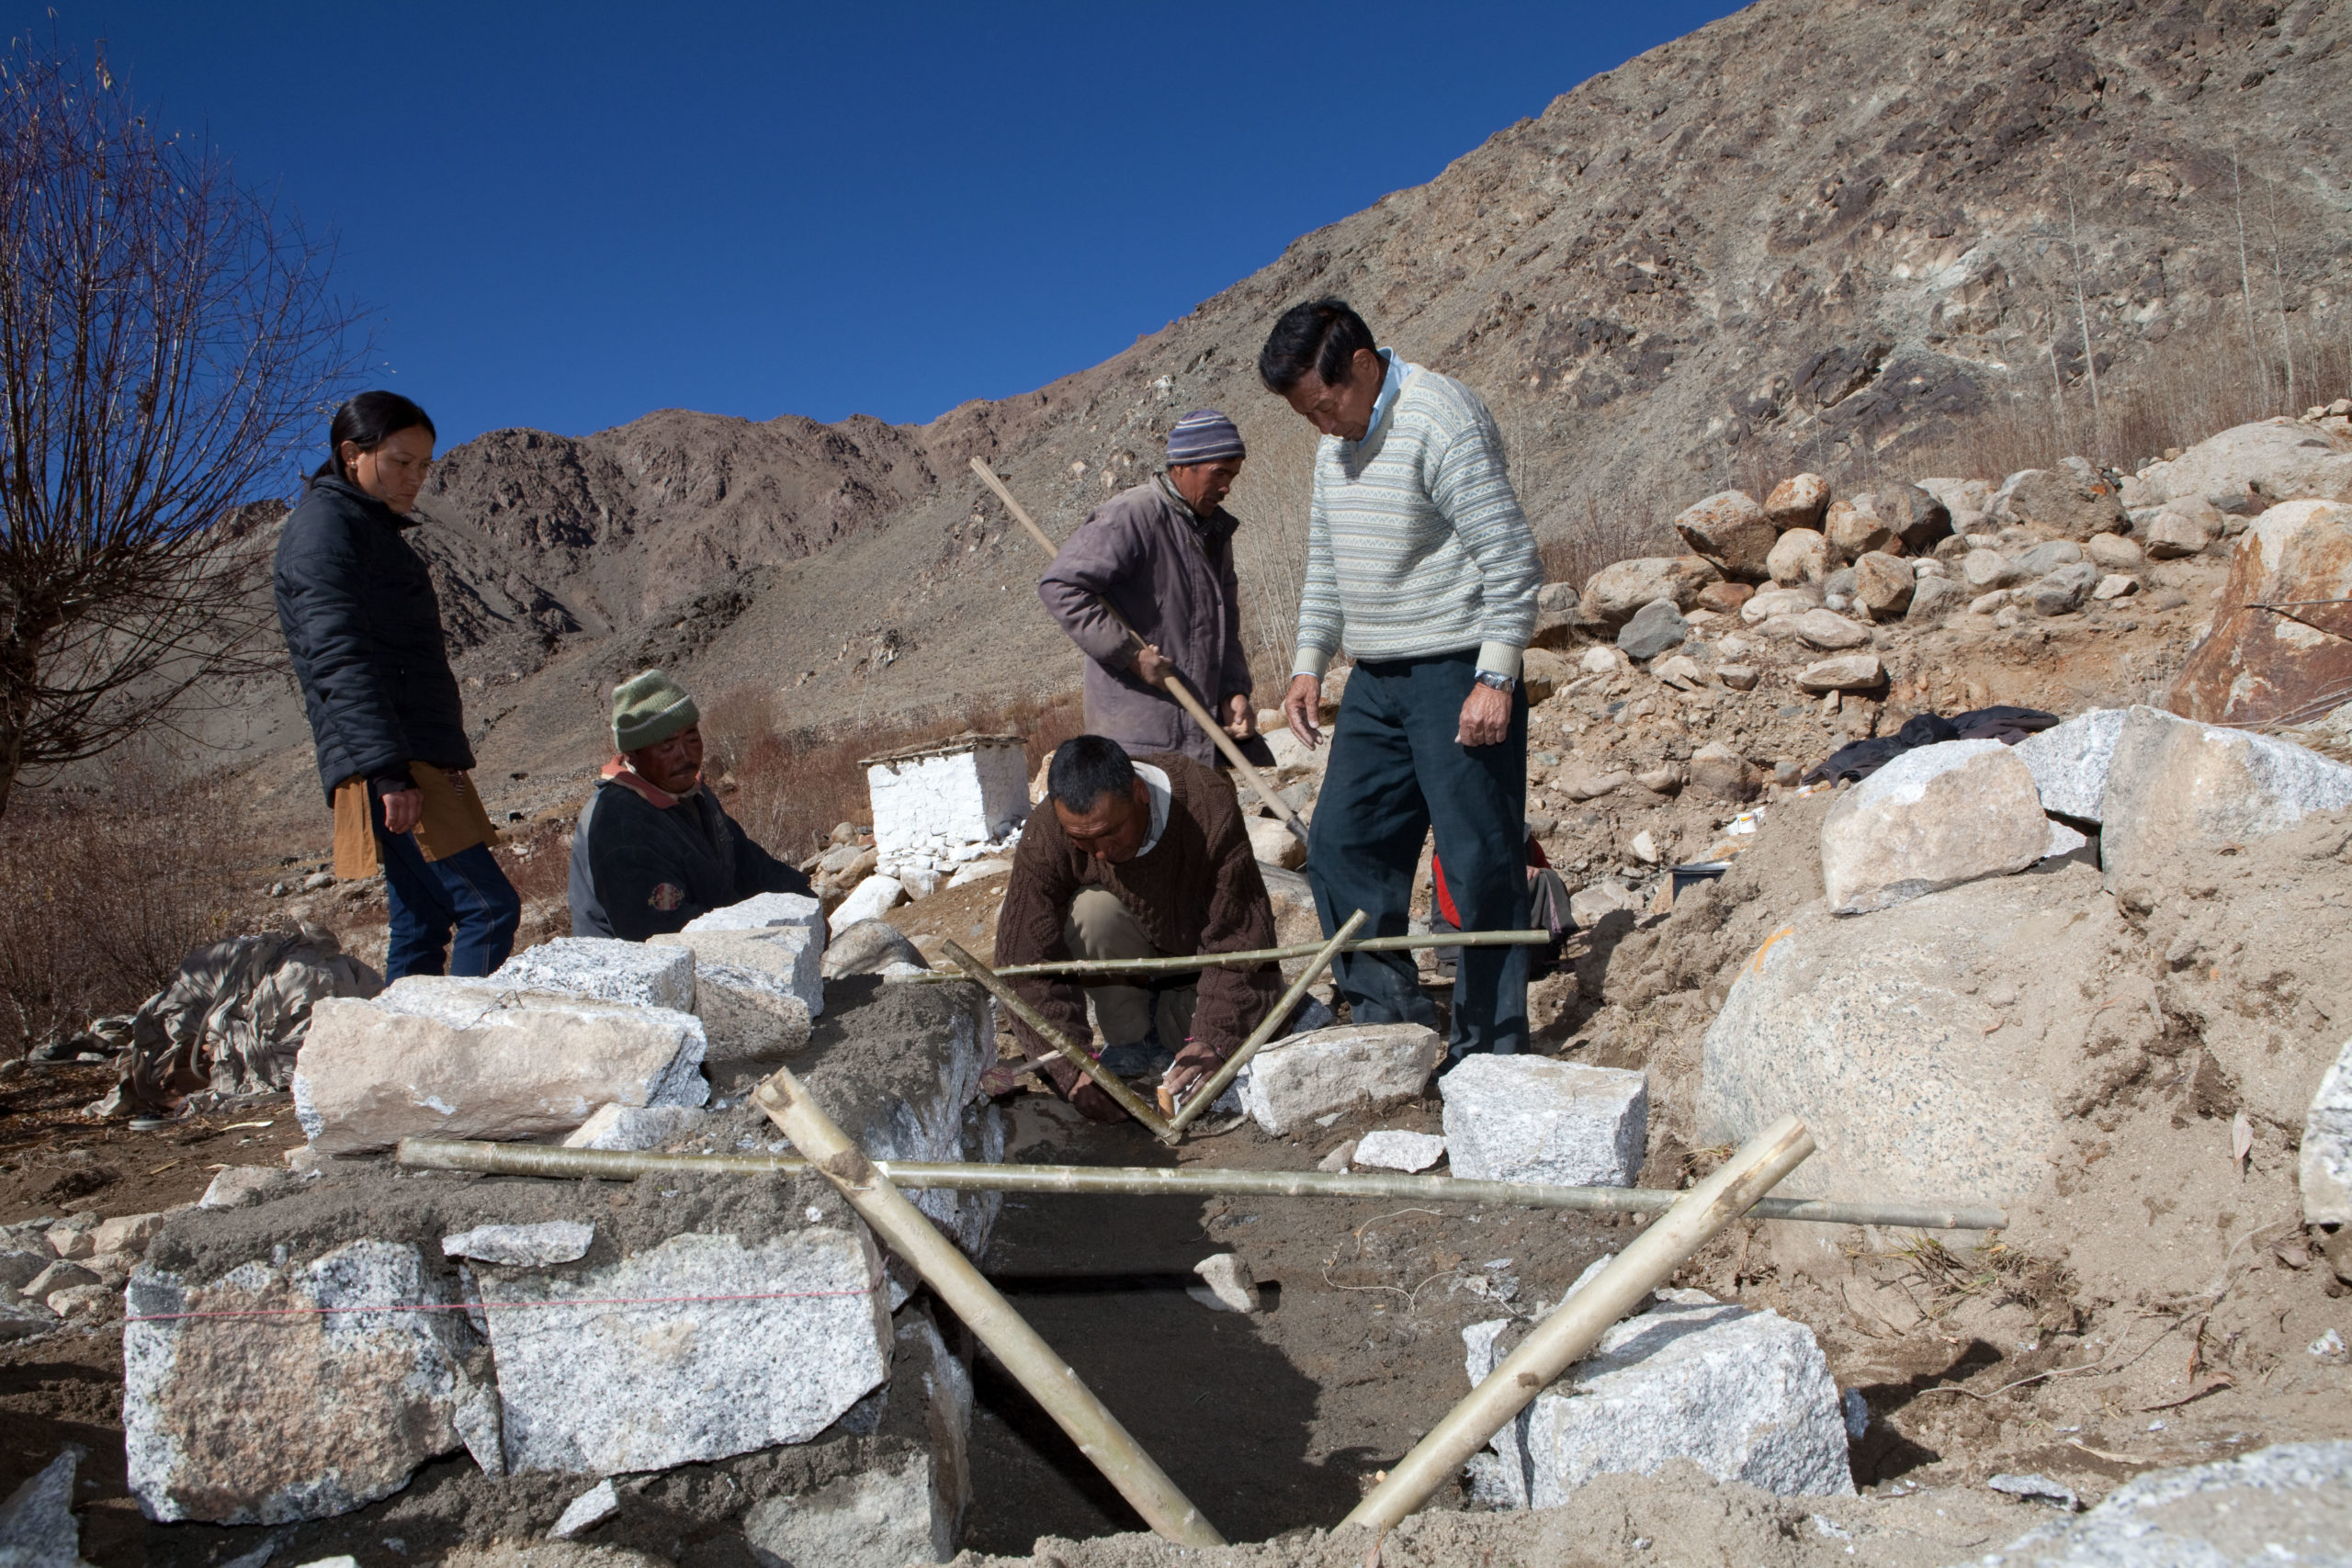 Chewang Norphel (R) at his artificial glacier project, adapting to glacier retreat. He has 10 projects in the region to bring water to local villages (Image: Emma Stoner / Alamy)